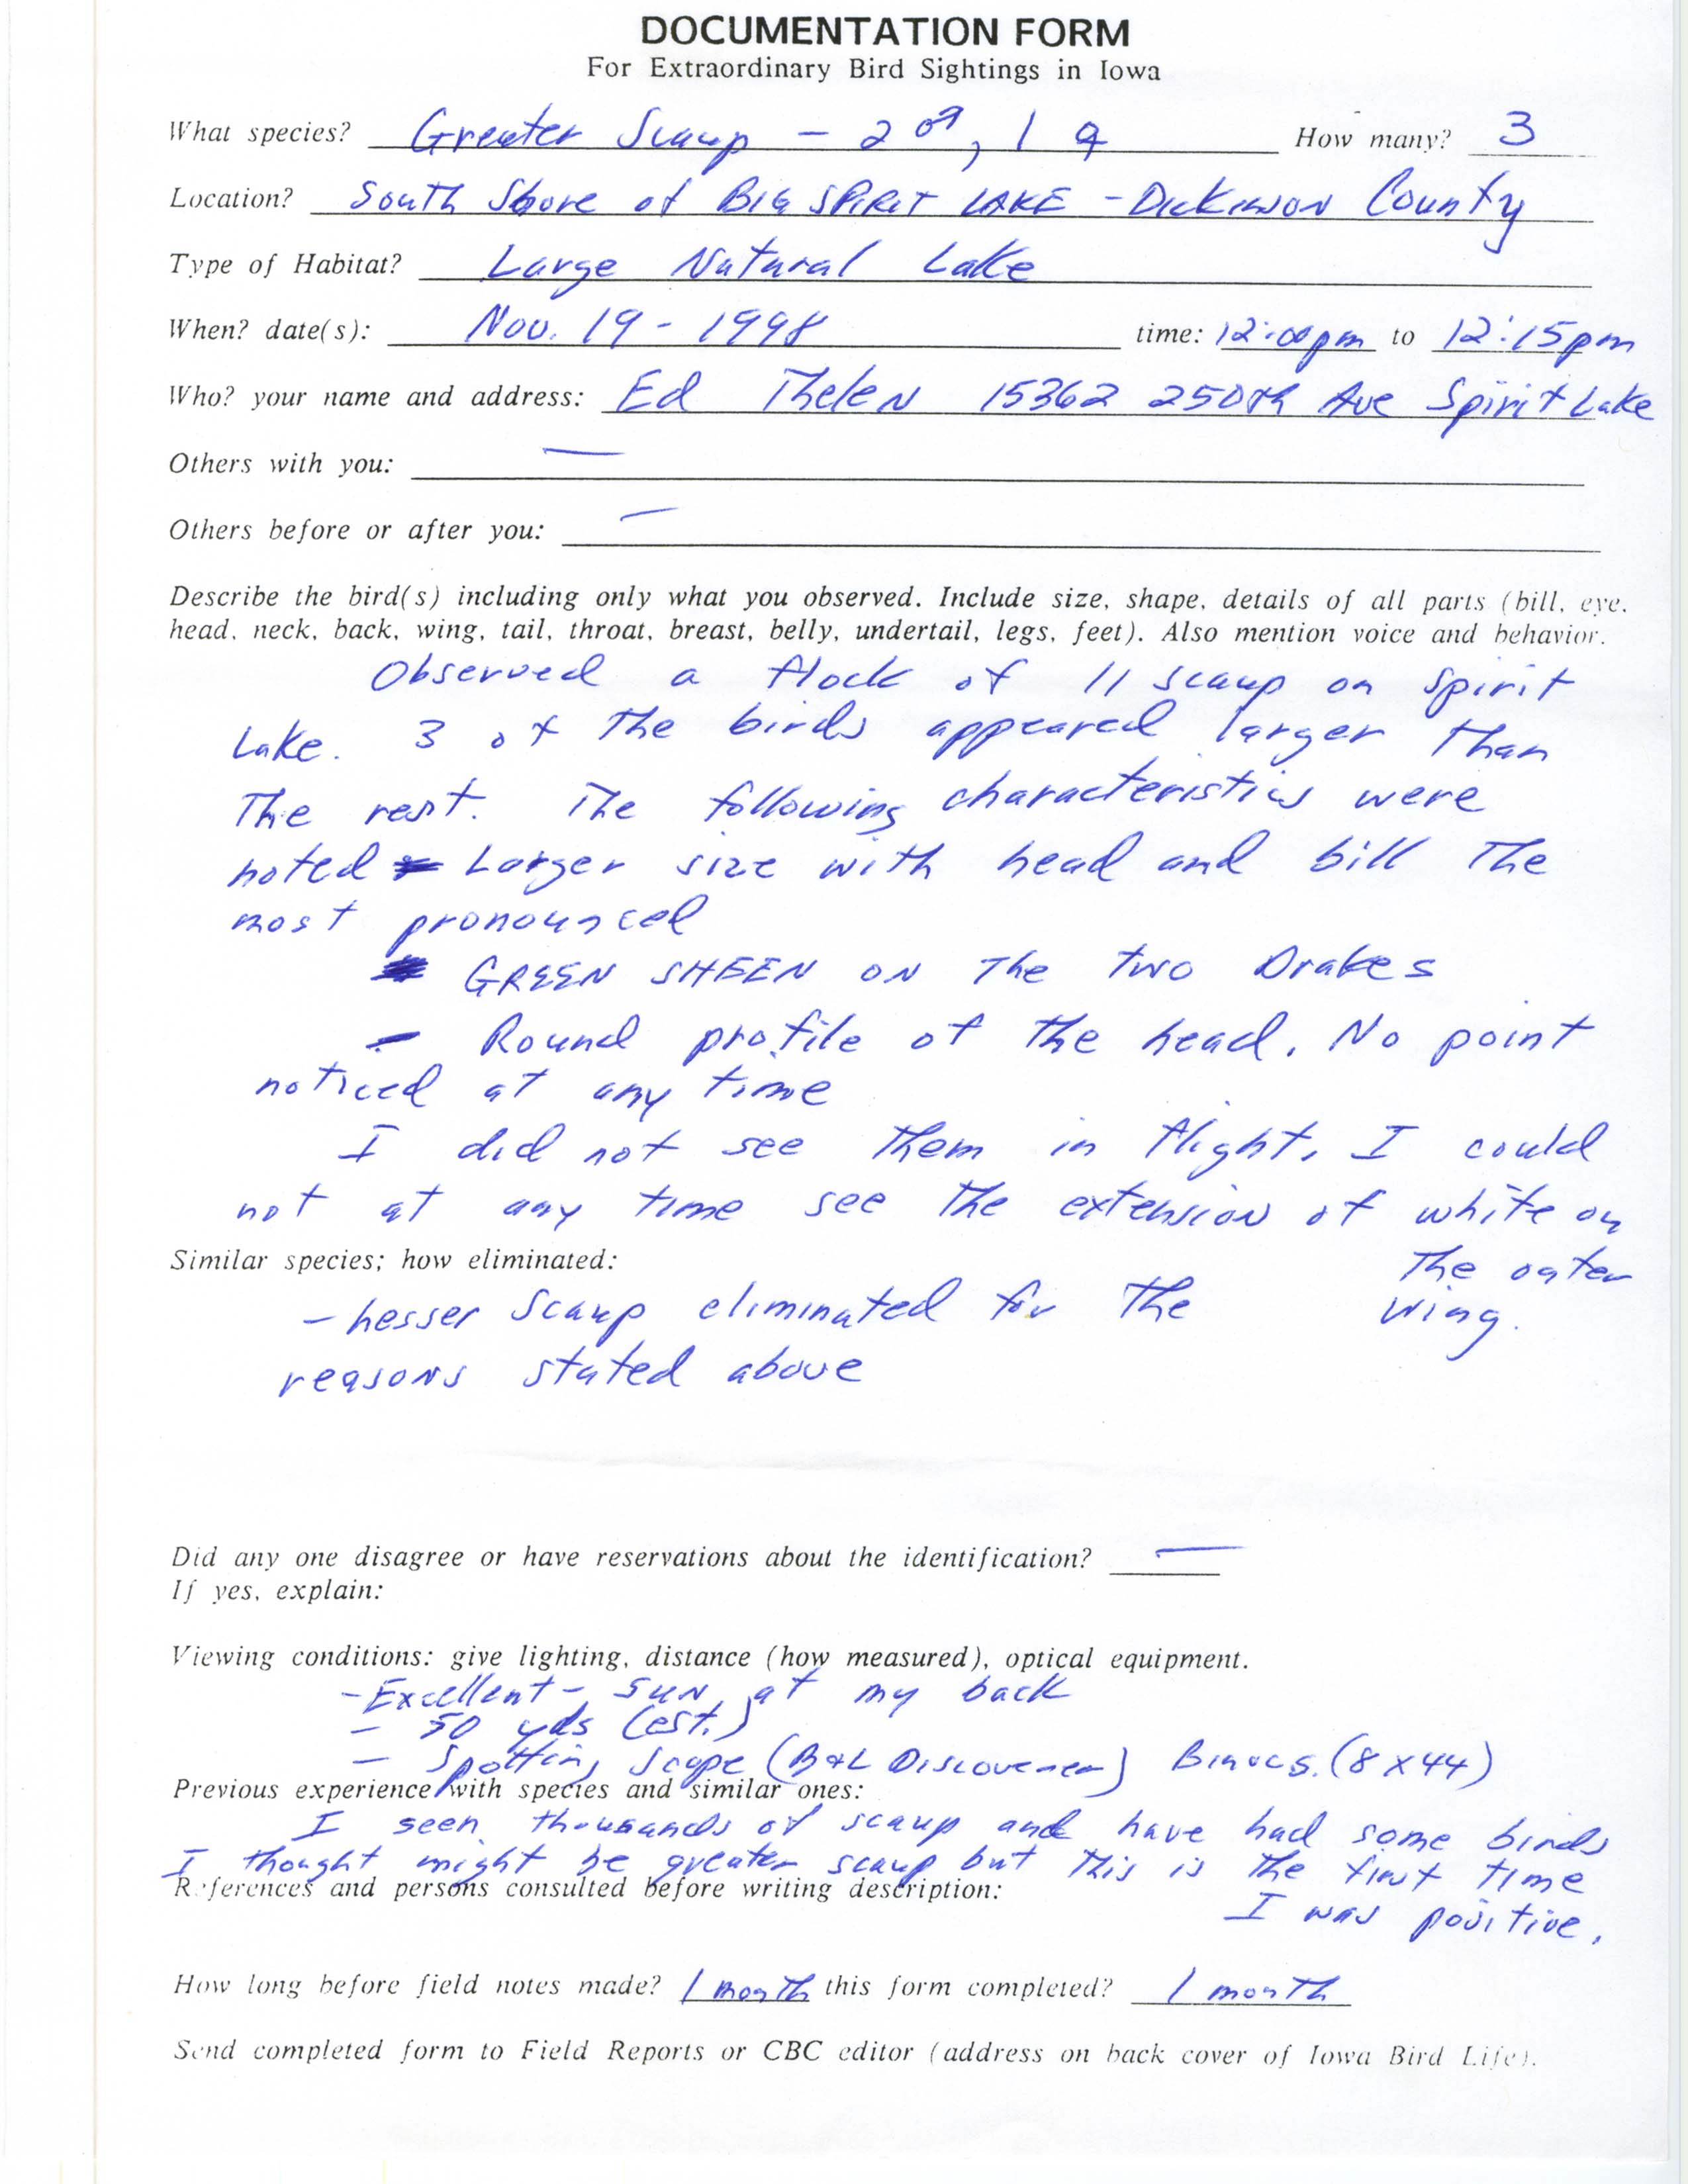 Rare bird documentation form for Greater Scaup at Big Spirit Lake, 1998